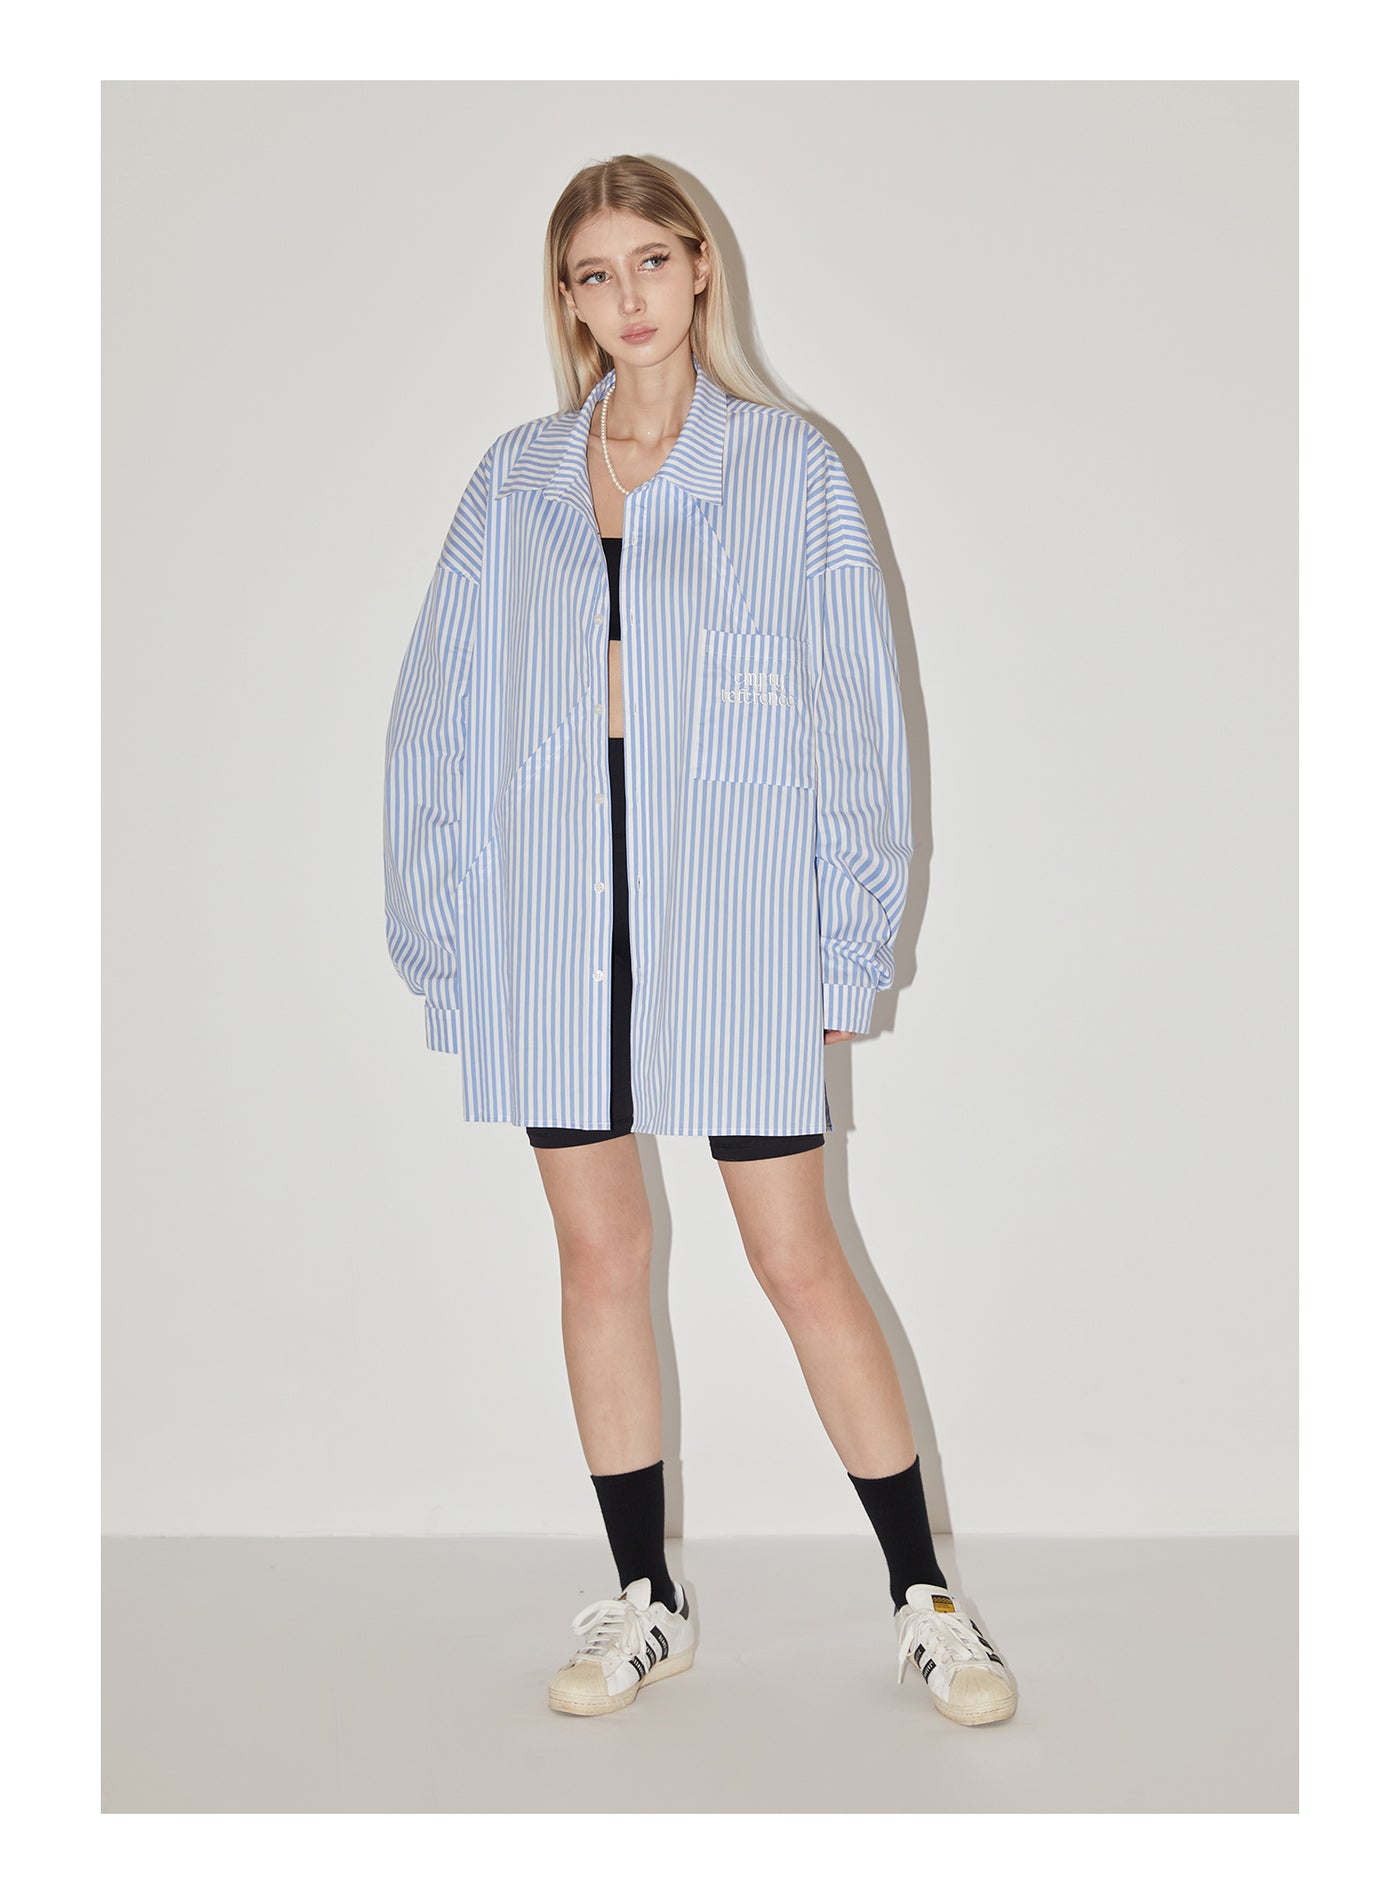 EMPTY REFERENCE Stripes Structured Long Sleeved Shirt